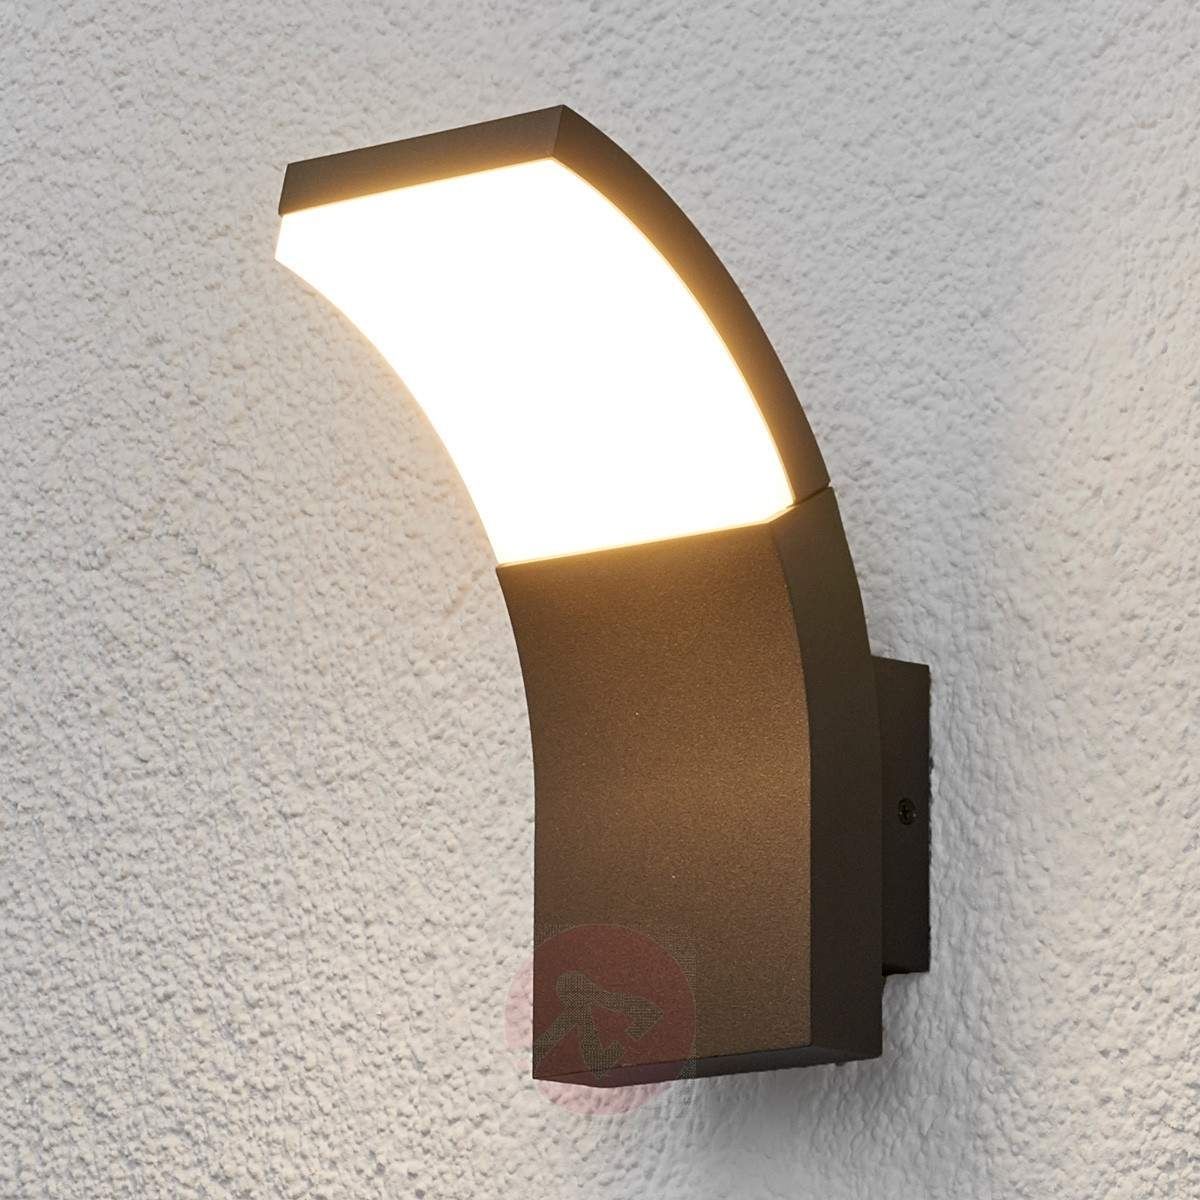 Led Outdoor Wall Light Timm Lights Co Uk Brilliant Led In 4 Within Outdoor Wall Lights At John Lewis (View 8 of 15)